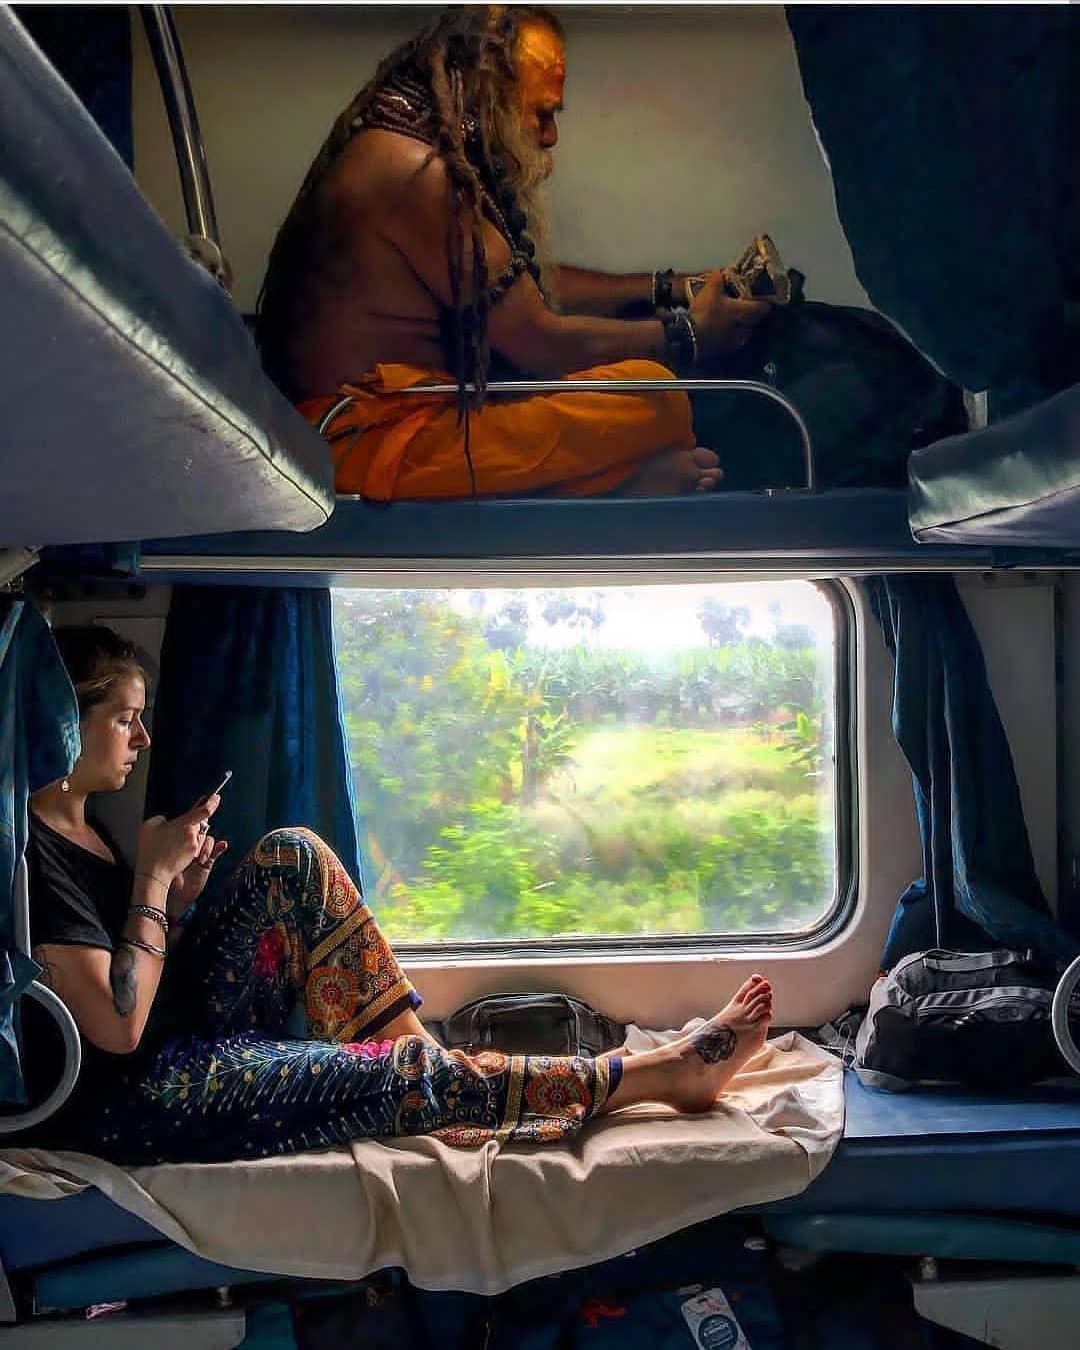 On a train in India